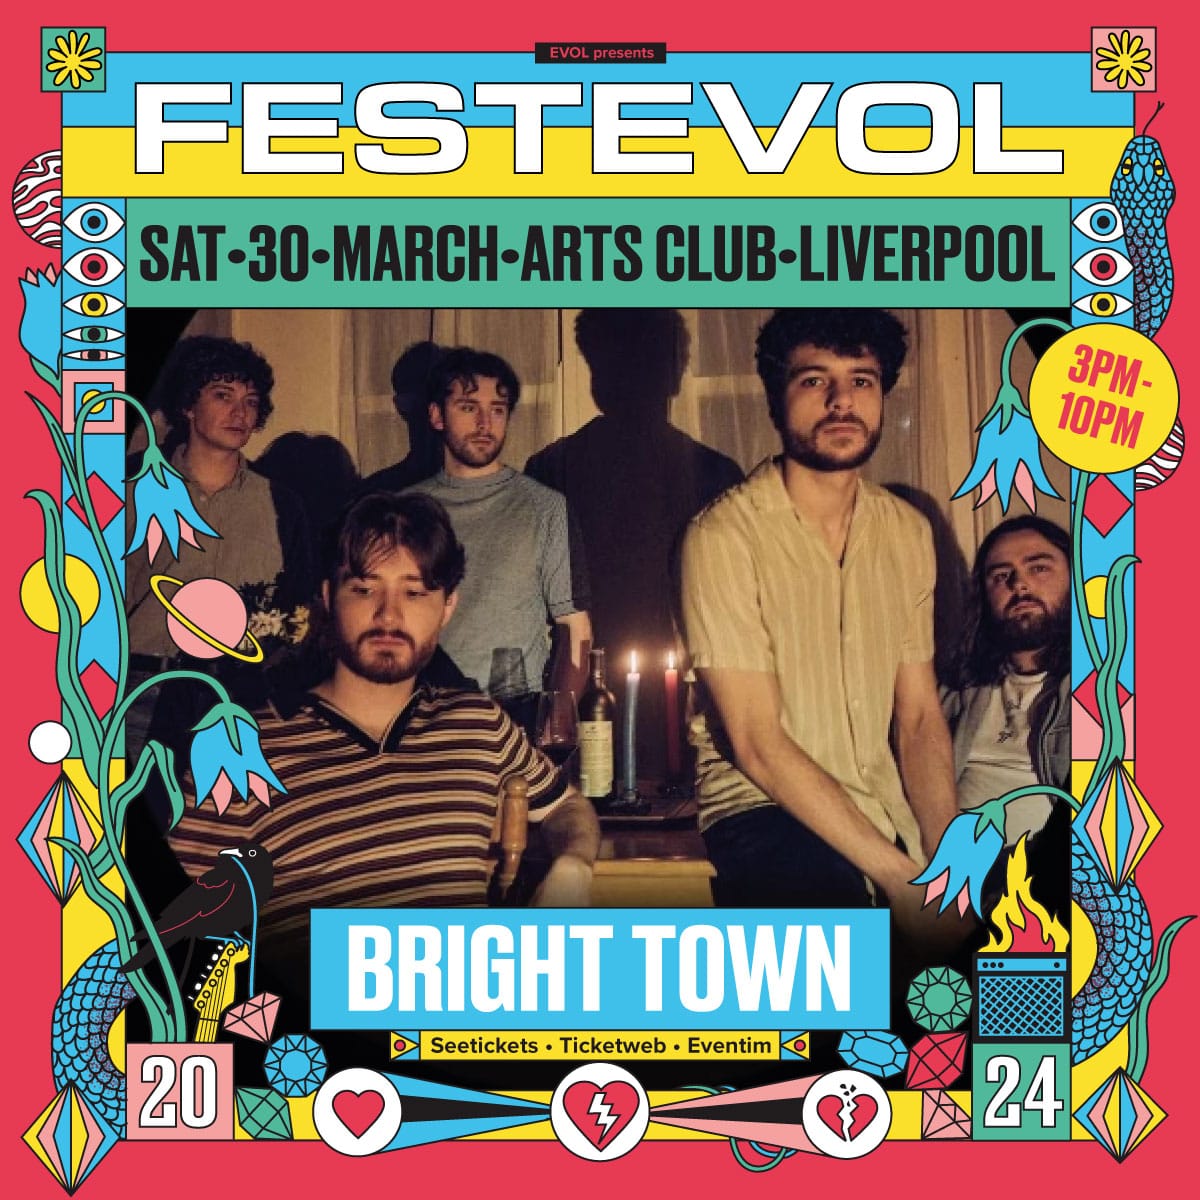 ❤️‍🔥 FESTEVOL ❤️‍🔥 30th March at @artsclublpool. we've been hard at work in the studio the last couple months and can't wait to tear it up on stage. tix in bio x